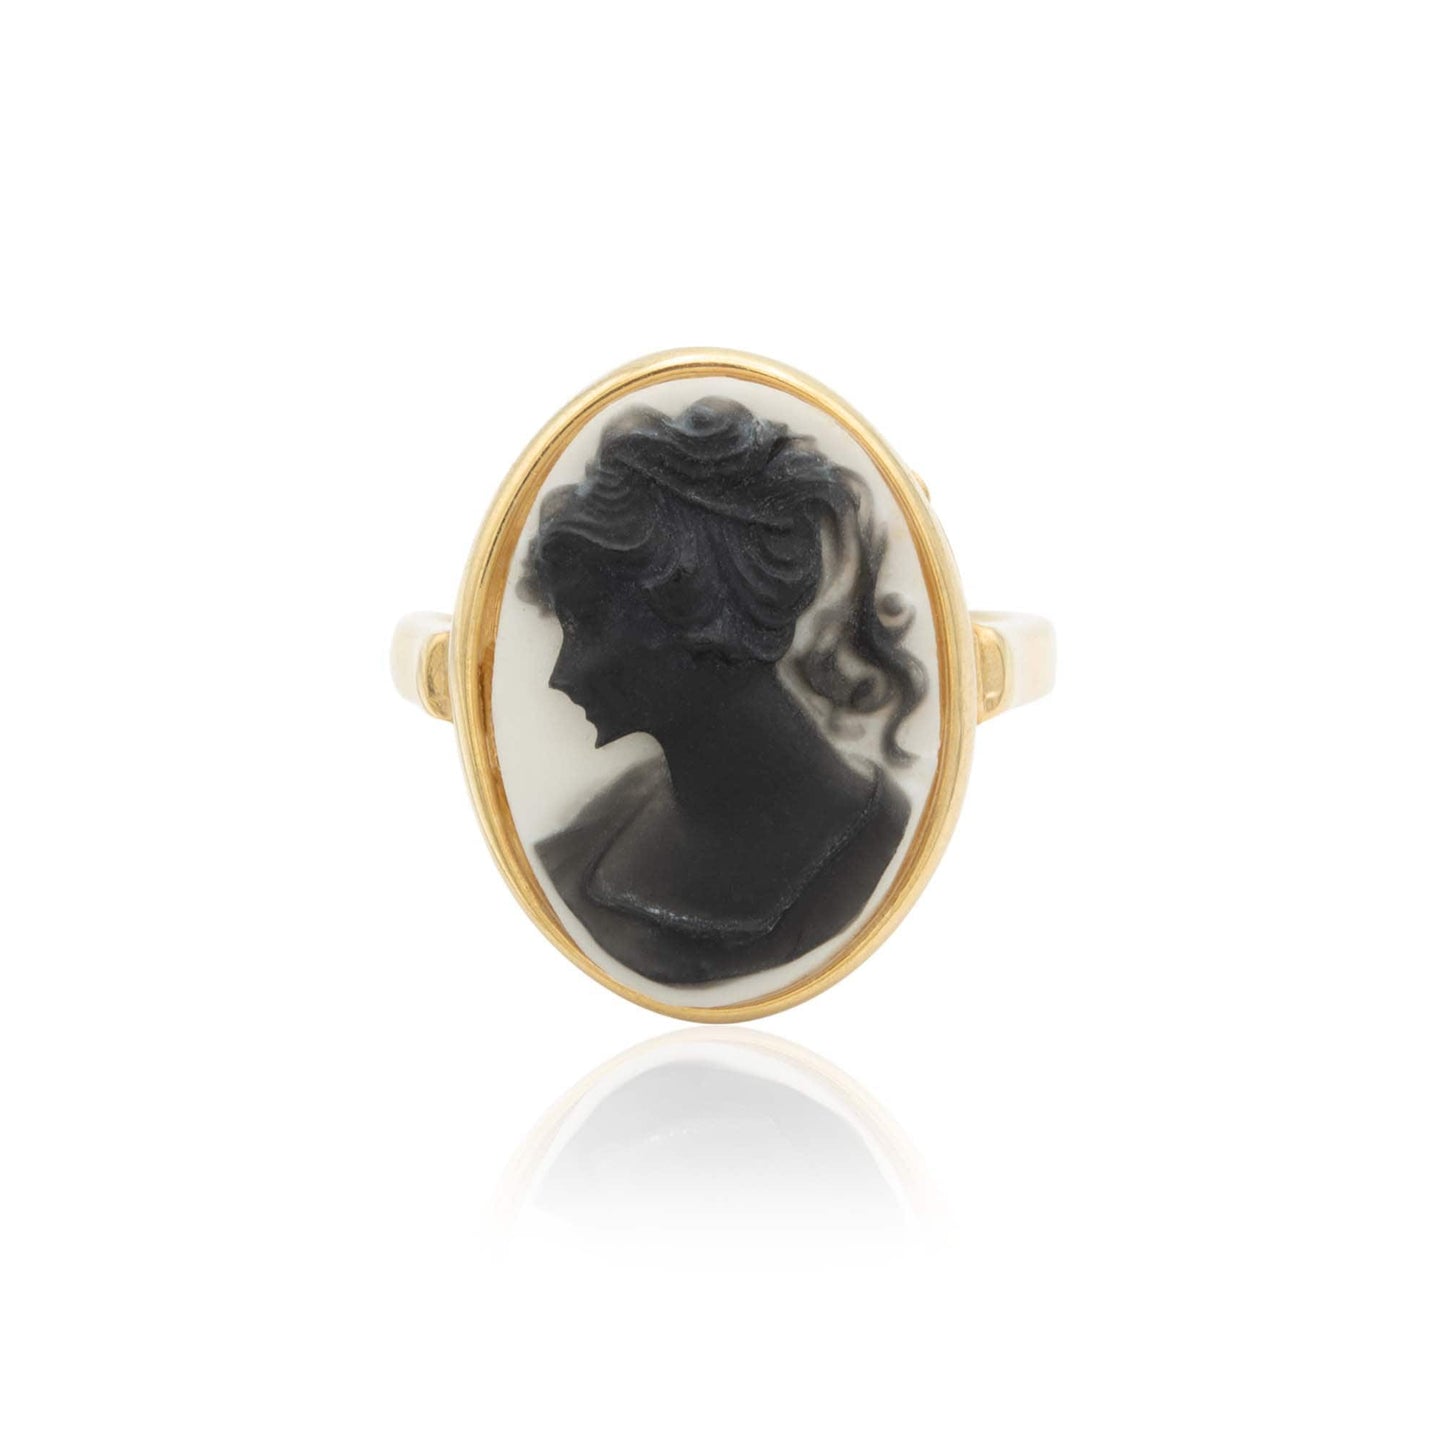 Vintage Black Silhouette on White Cameo Bead Ring Antique 18k Gold Womans Jewelry Girls Handmade Cameo R1776 - Limited Stock - Never Worn